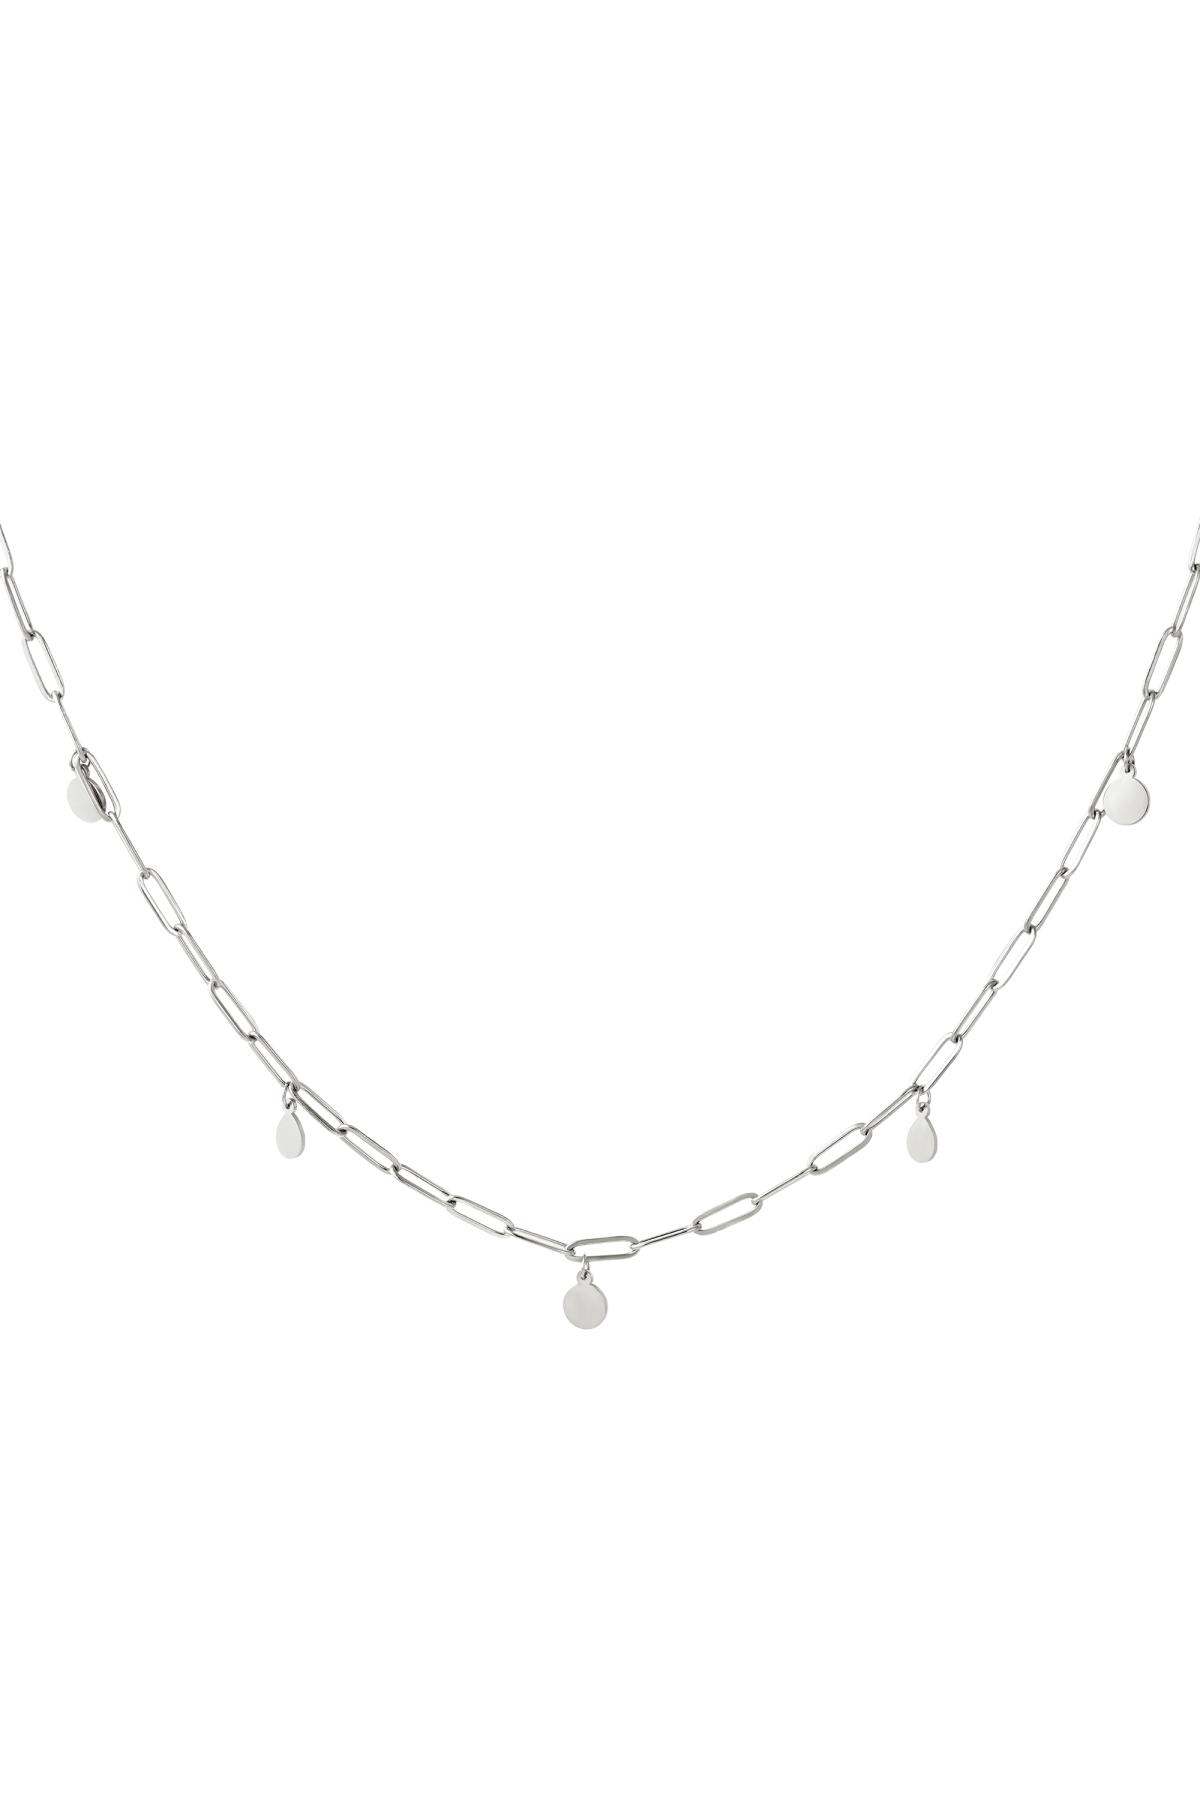 Stainless steel necklace confetti Silver h5 